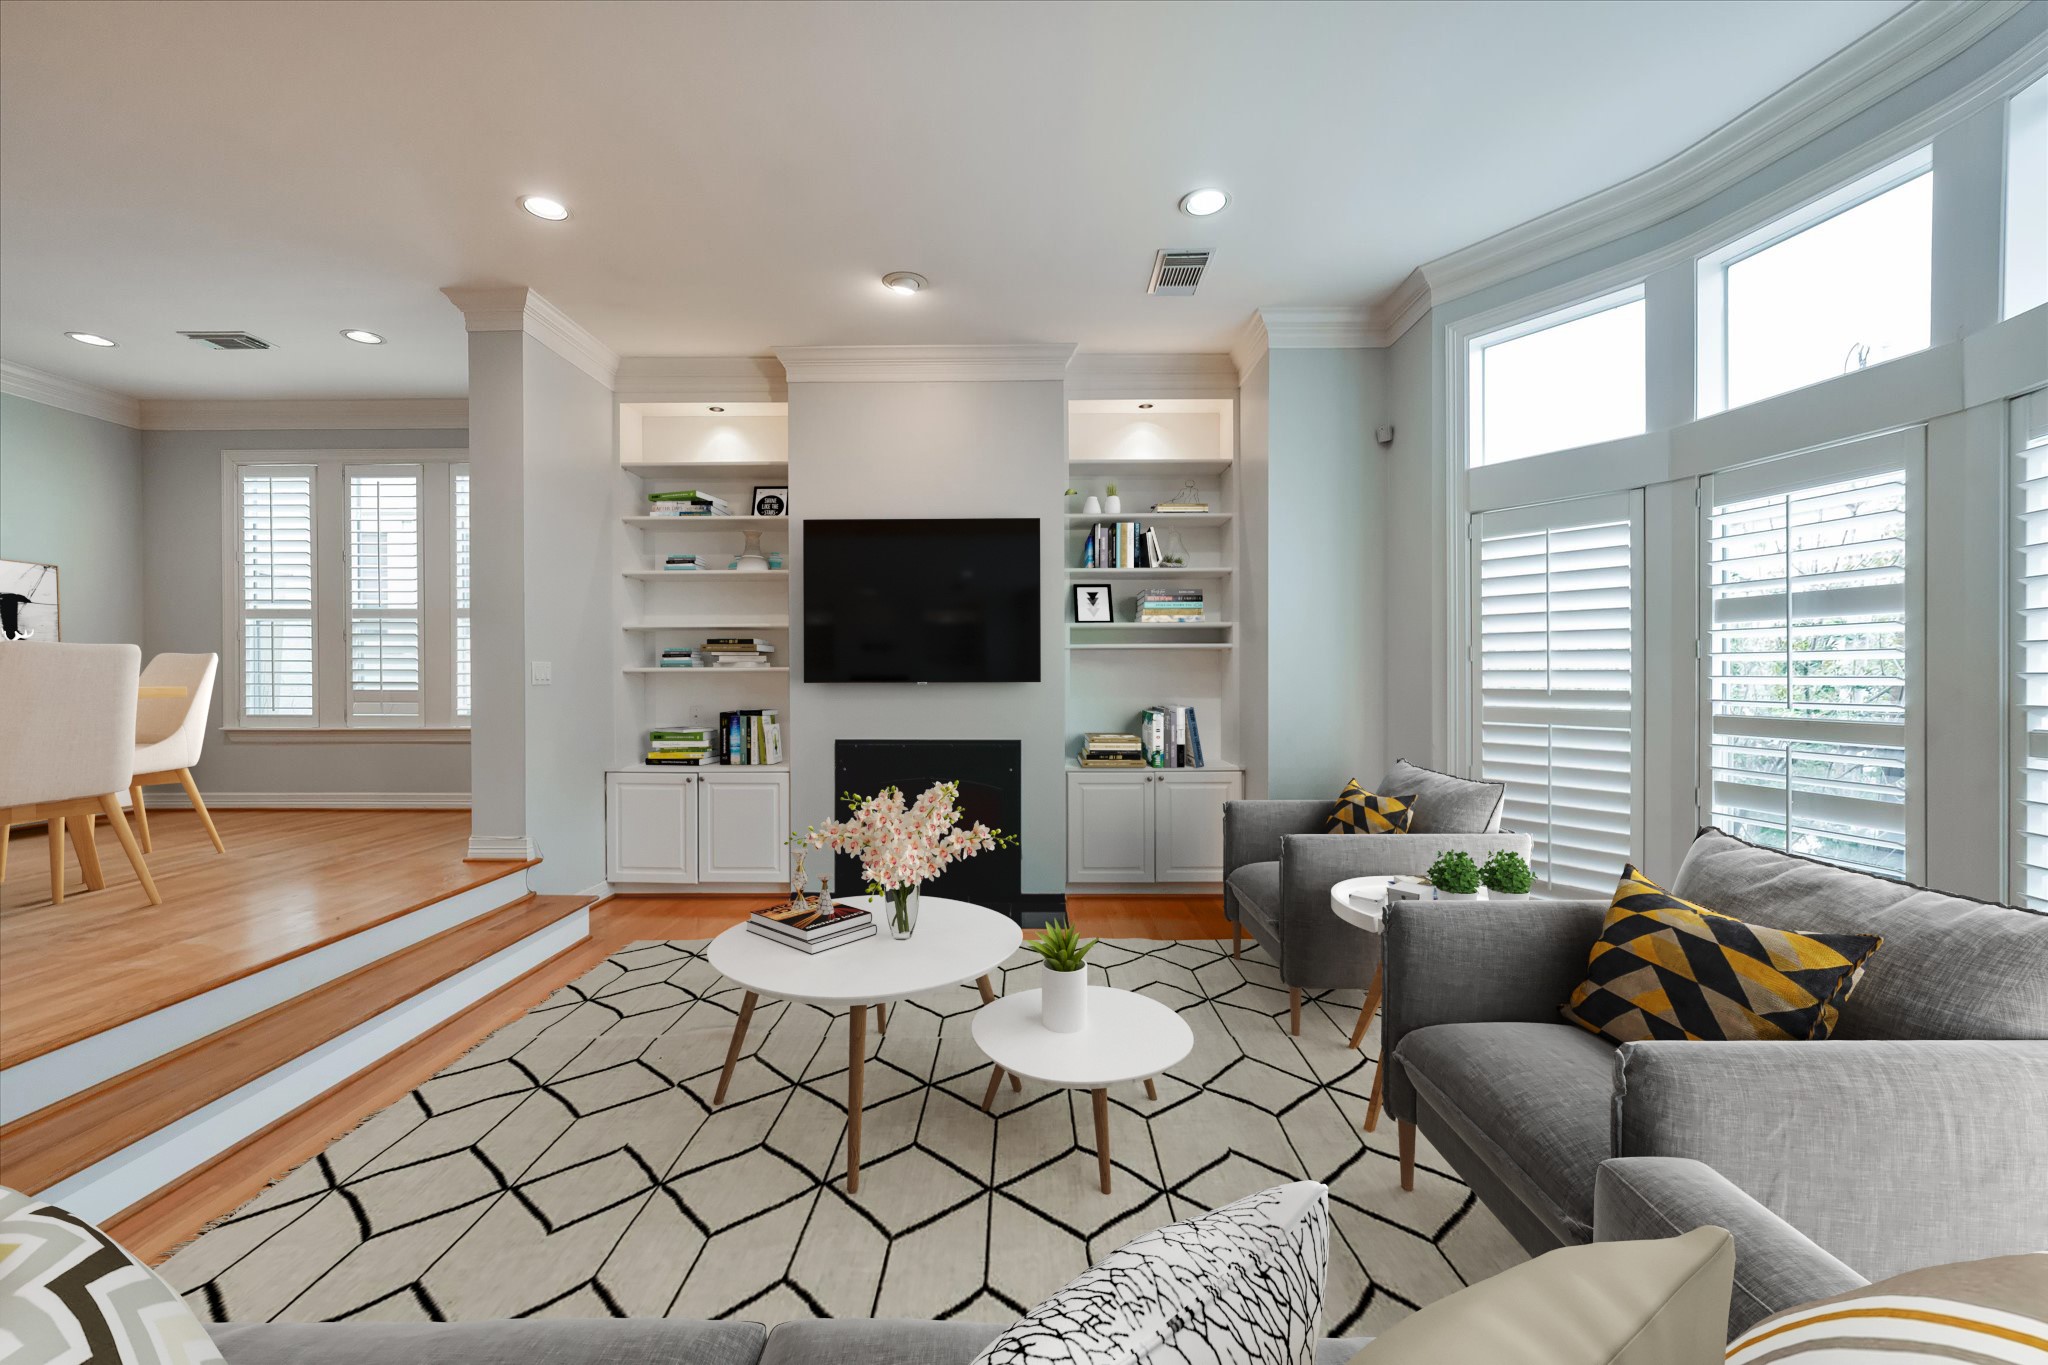 Welcome to your second-floor living area. This space is truly exquisite with bay area windows, recessed lighting, built-in shelving, and crown molding.